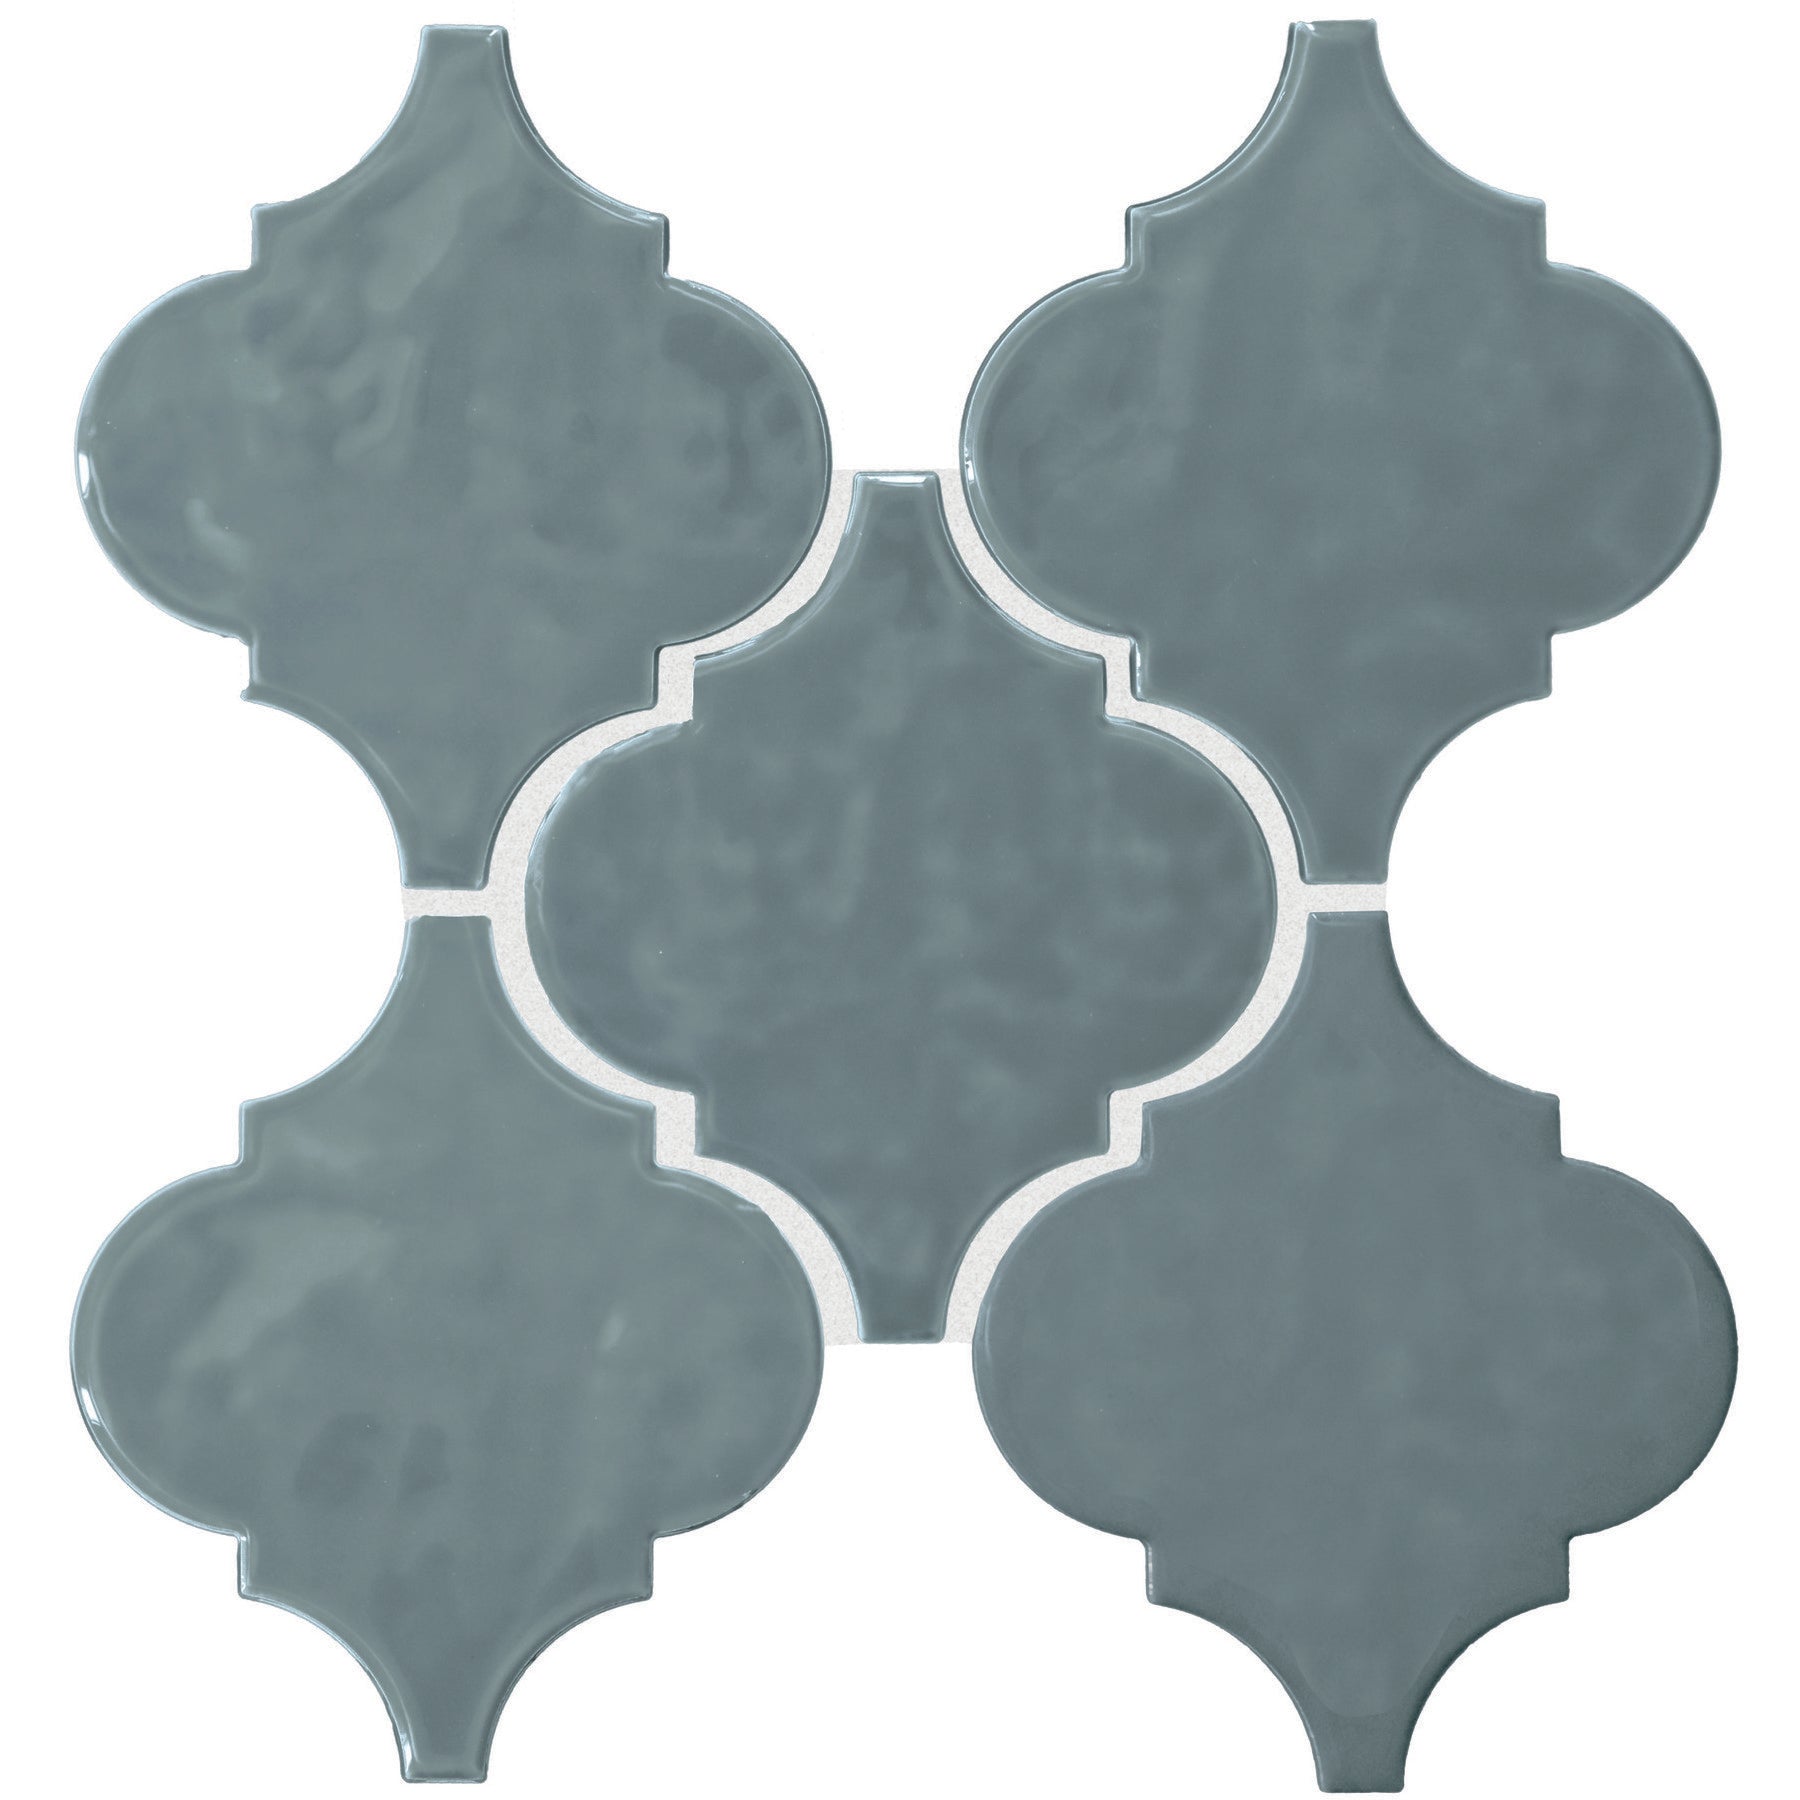 American Olean - Playscapes Arabesque Wall Tile - Sky PS74